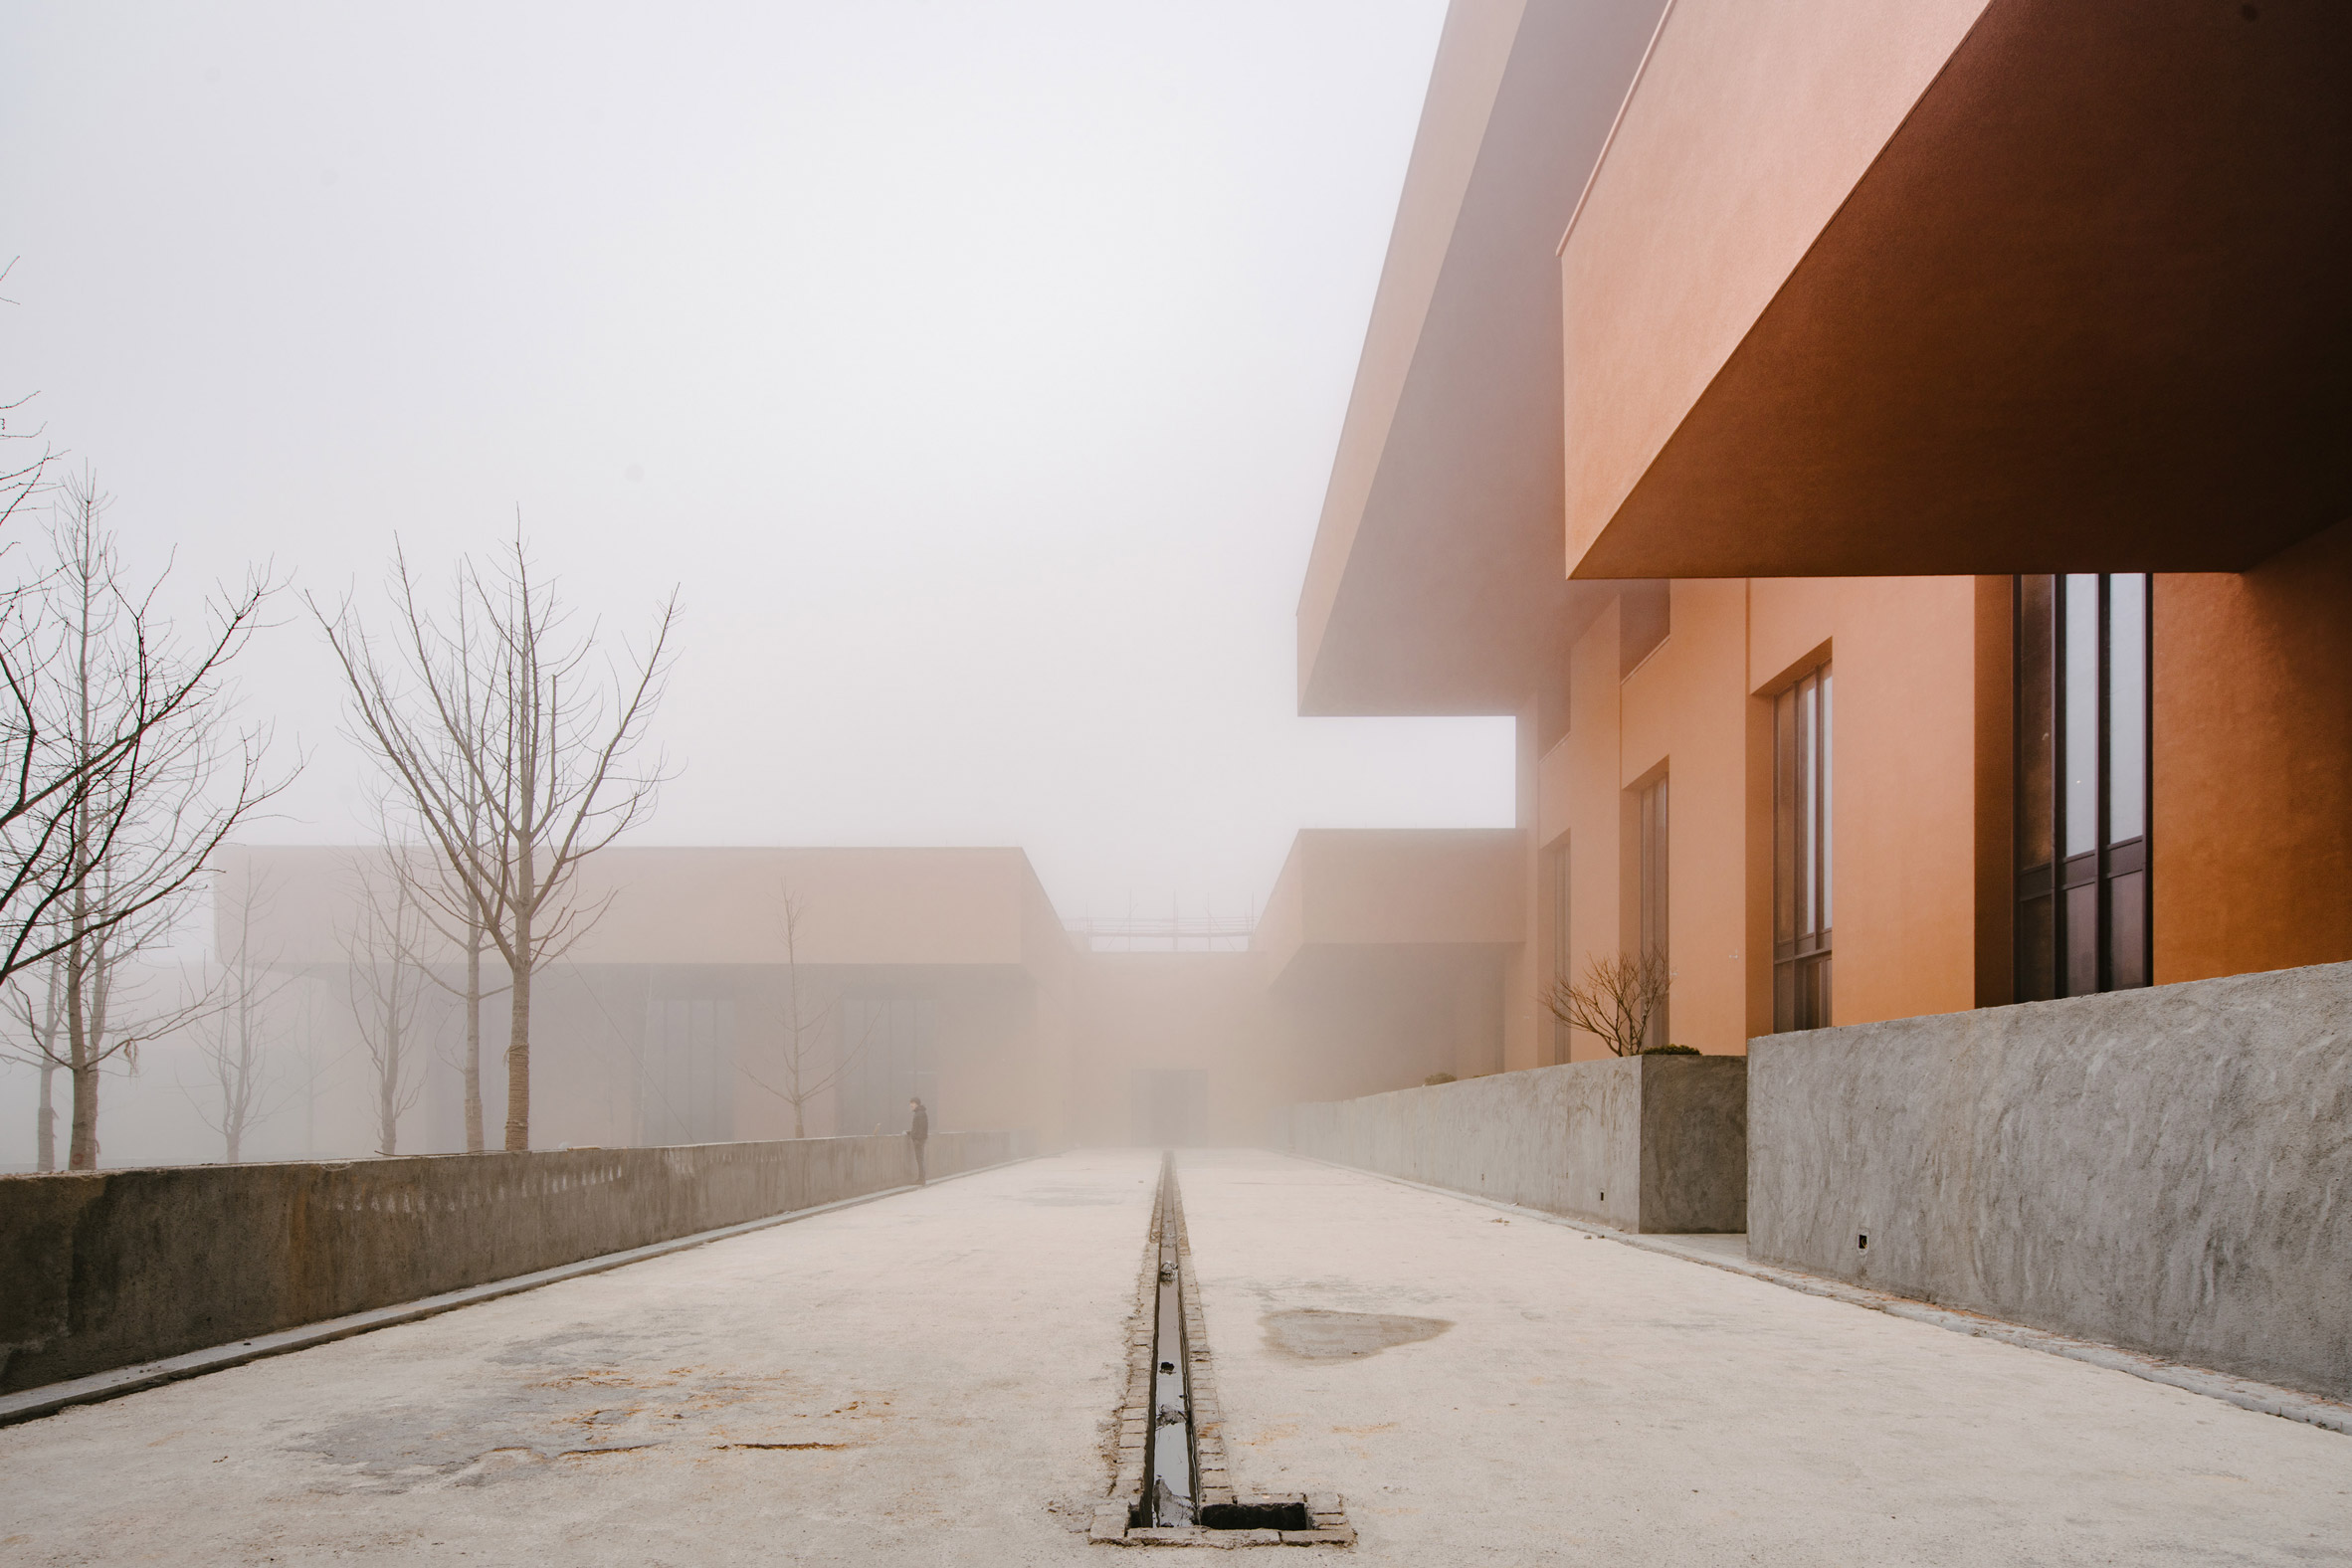 Zhejiang museum, designed by David Chipperfield Architects